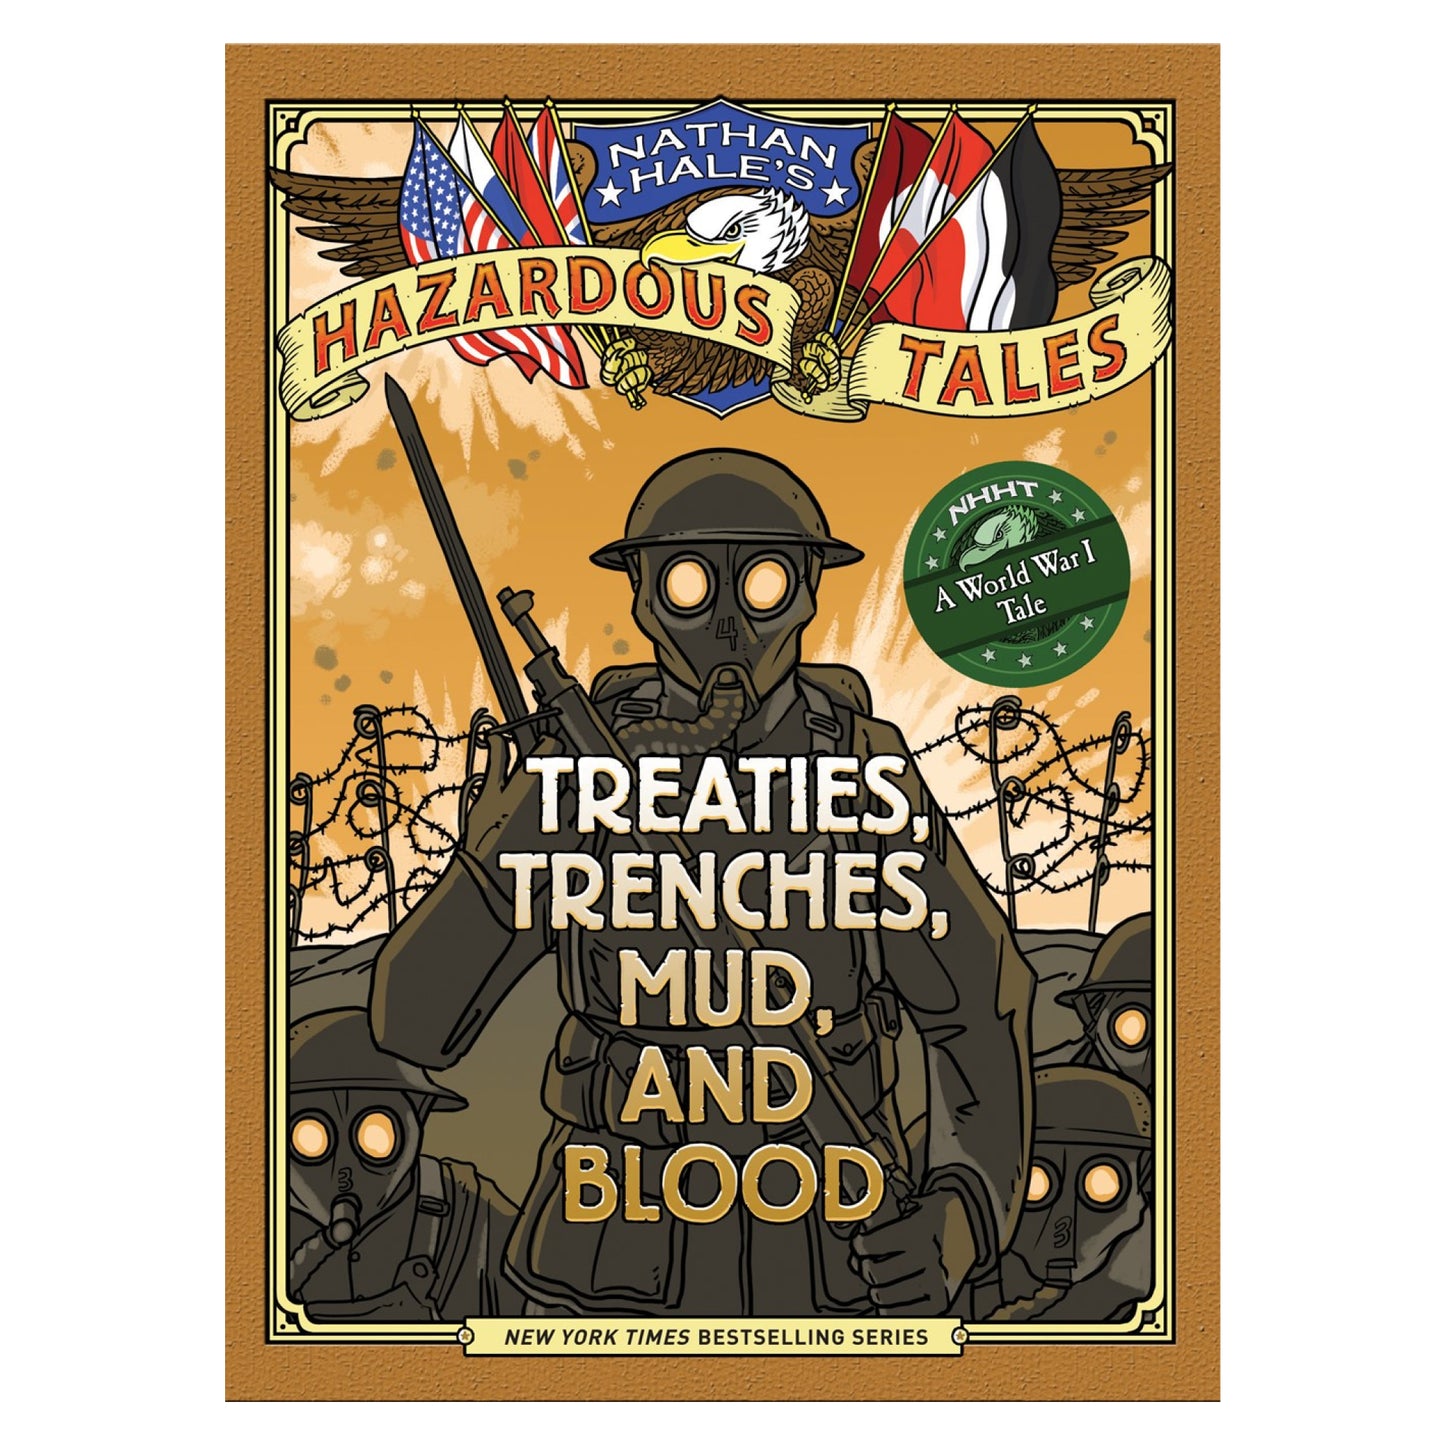 Treaties, Trenches, Mud, and Blood (Hazardous Tales #7)